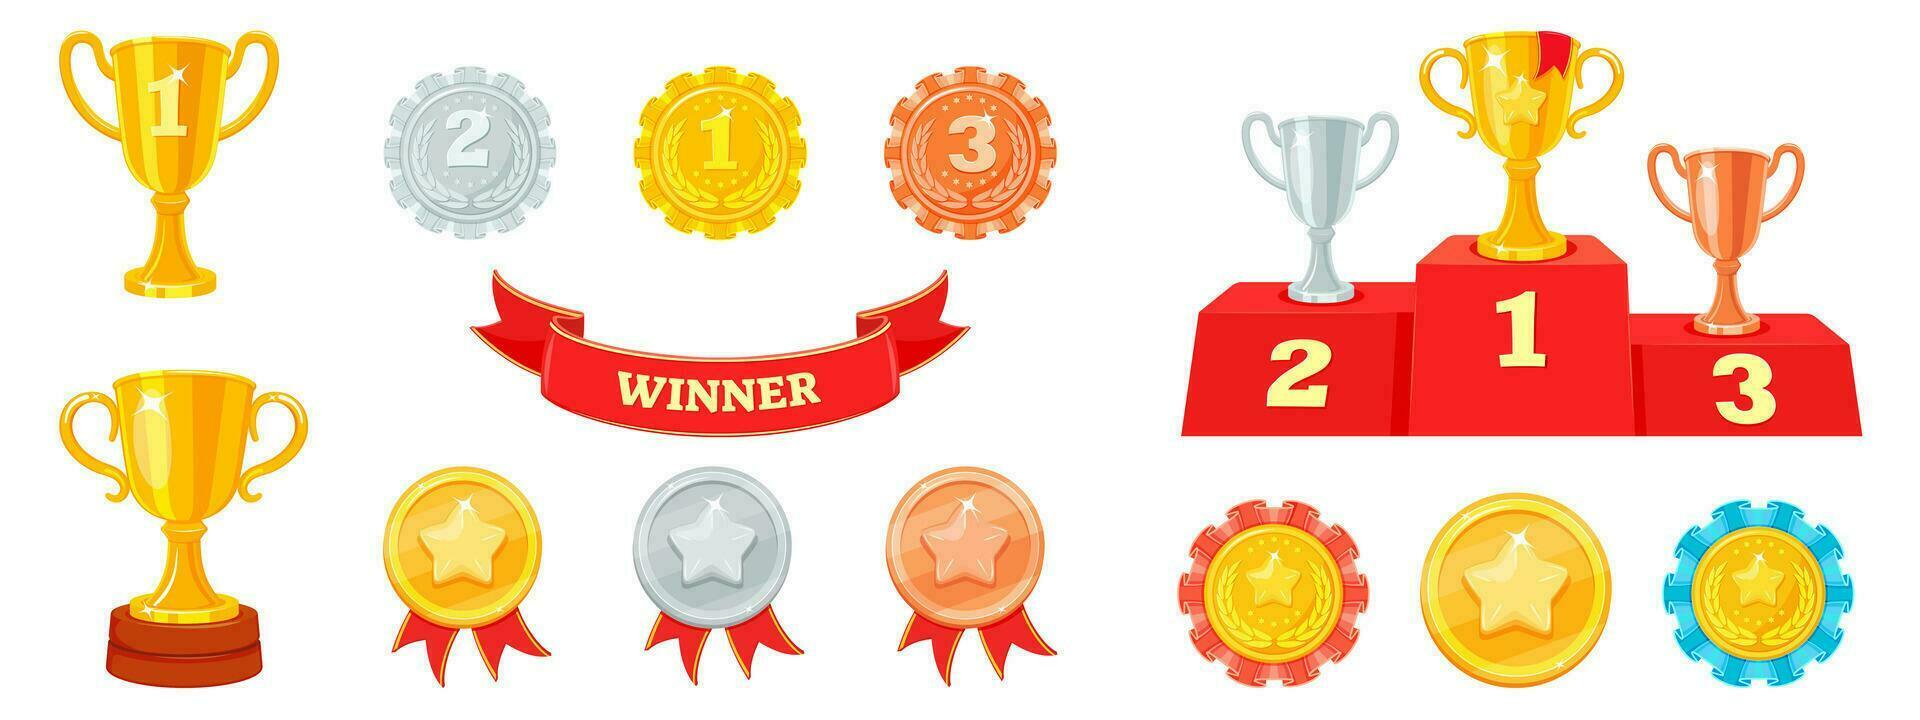 Set of winner awards. Vector illustration of cup, medal, podium for awarding. Gold, silver and bronze champion trophies